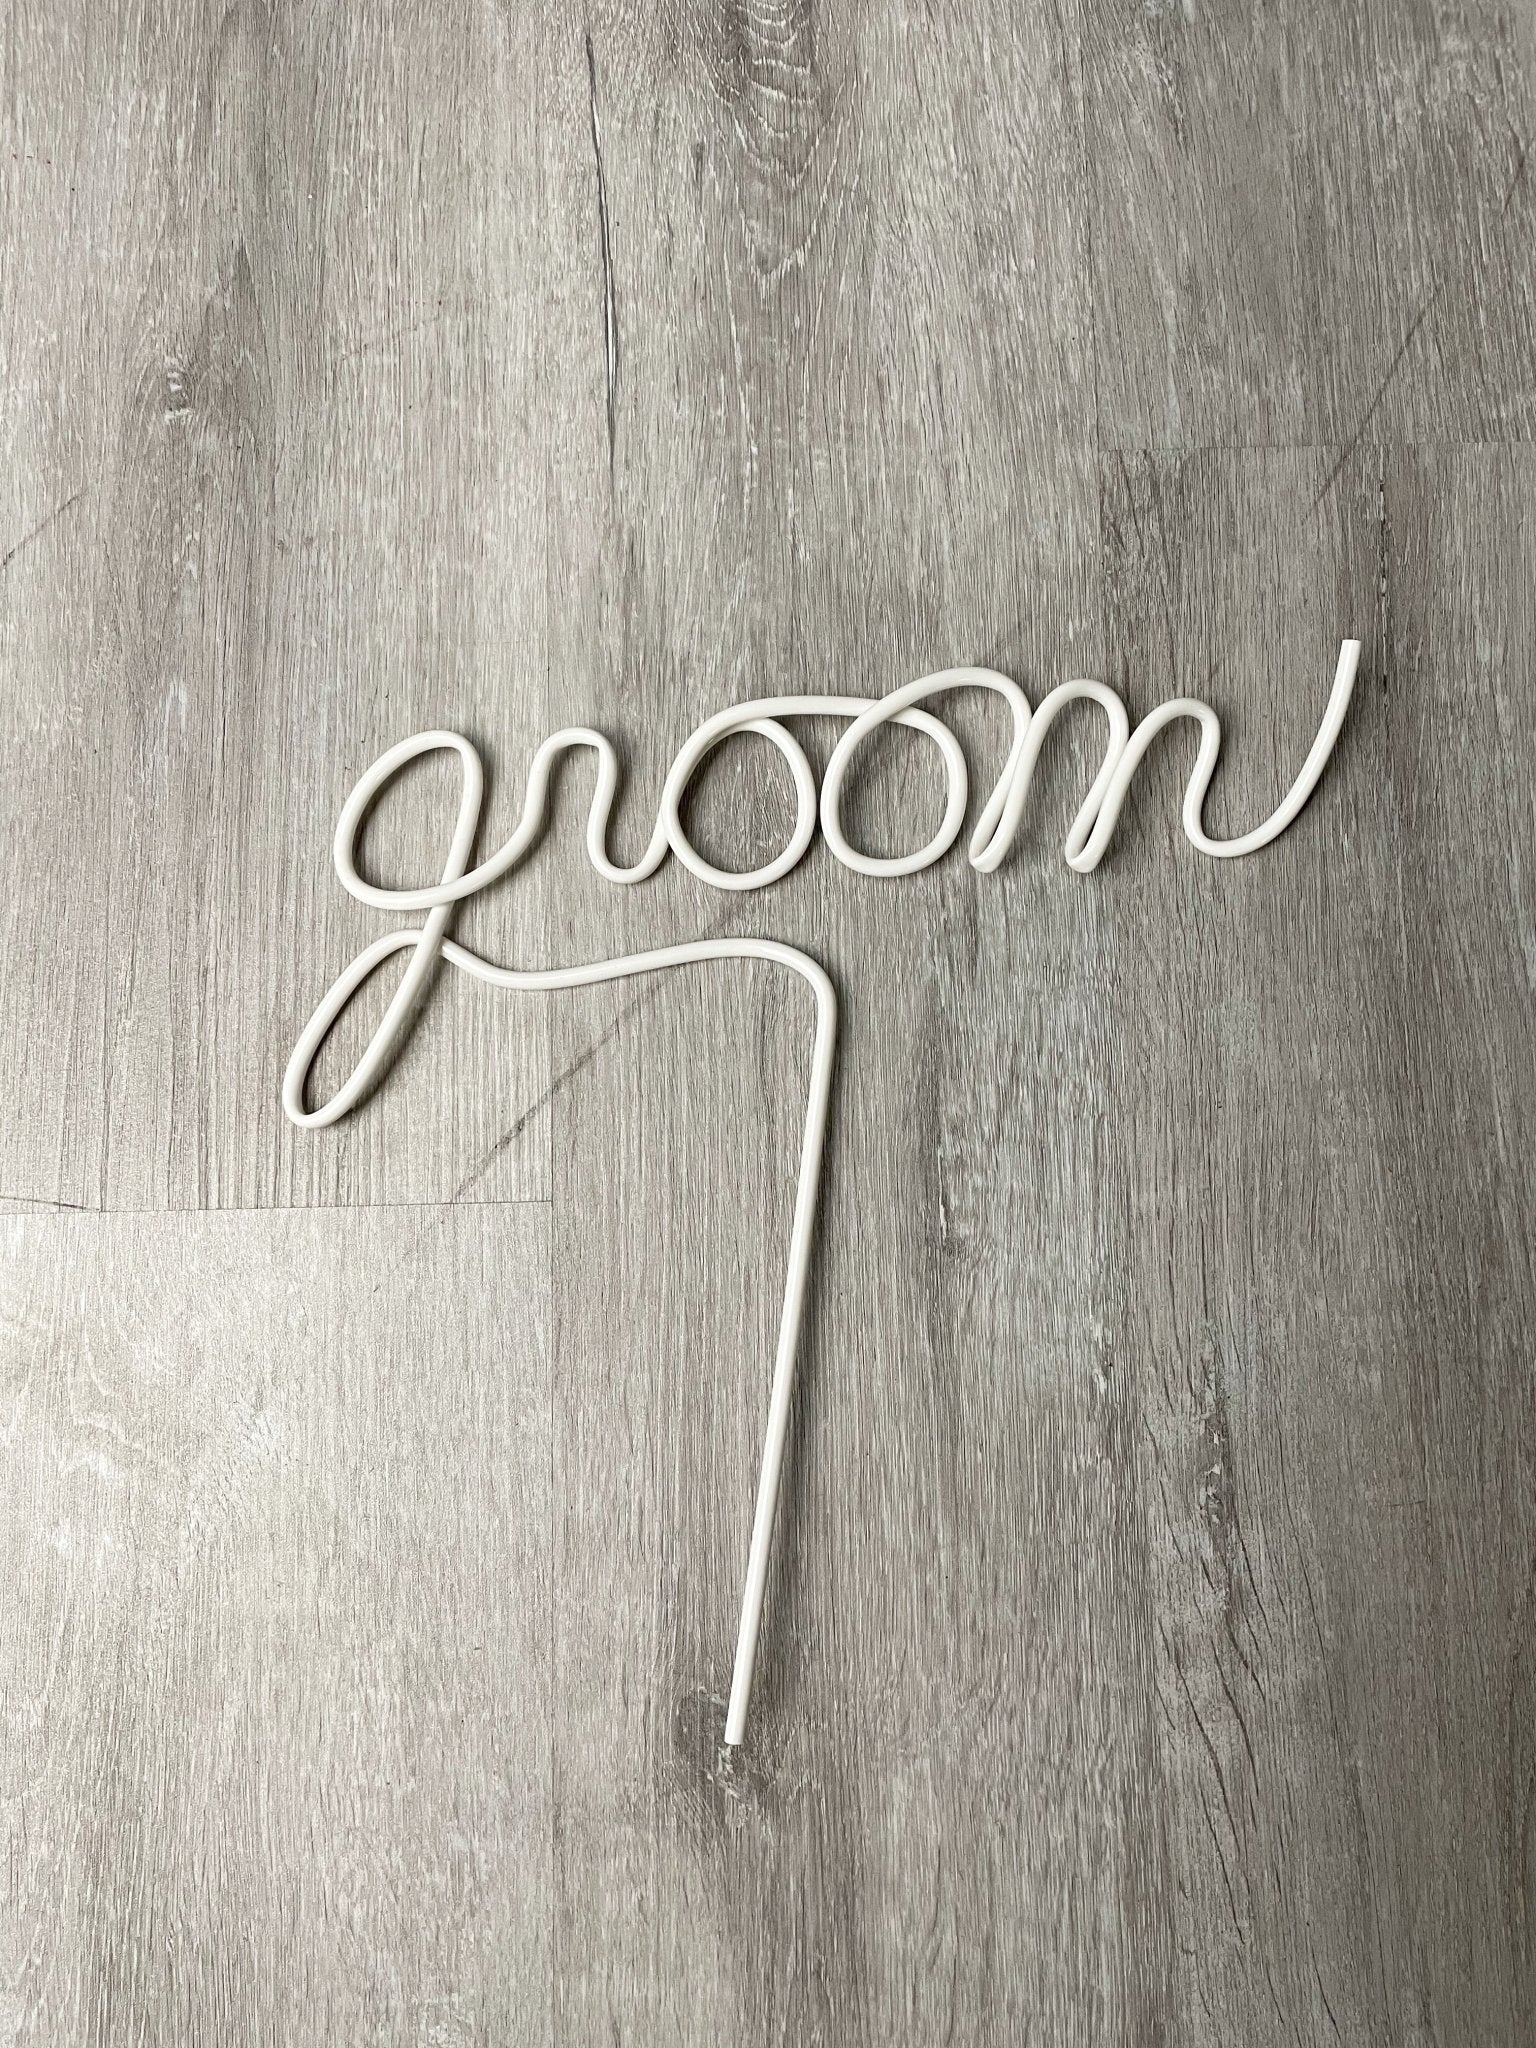 Groom word straw - Stylish straw -  Cute Bridal Collection at Lush Fashion Lounge Boutique in Oklahoma City